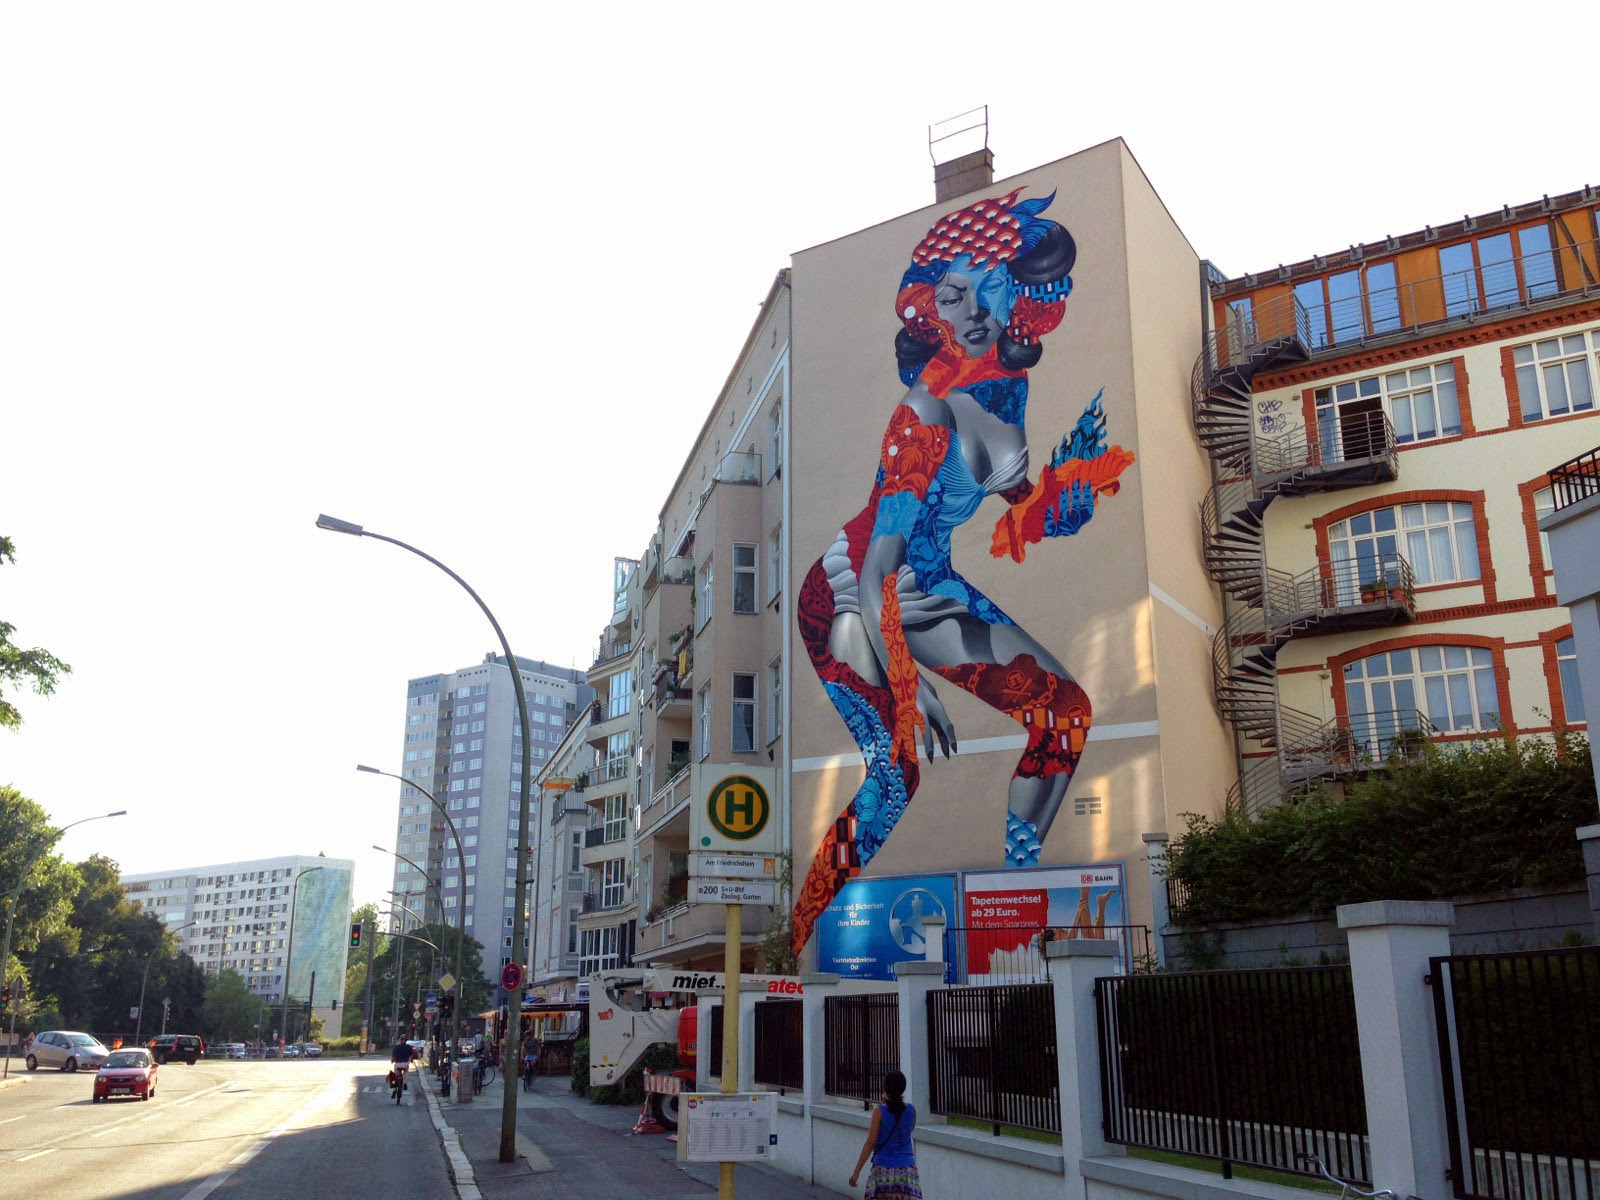 While you discovered some progress images a few days ago, Tristan Eaton has now completed his monster piece for the One Wall project by UrbanNation.